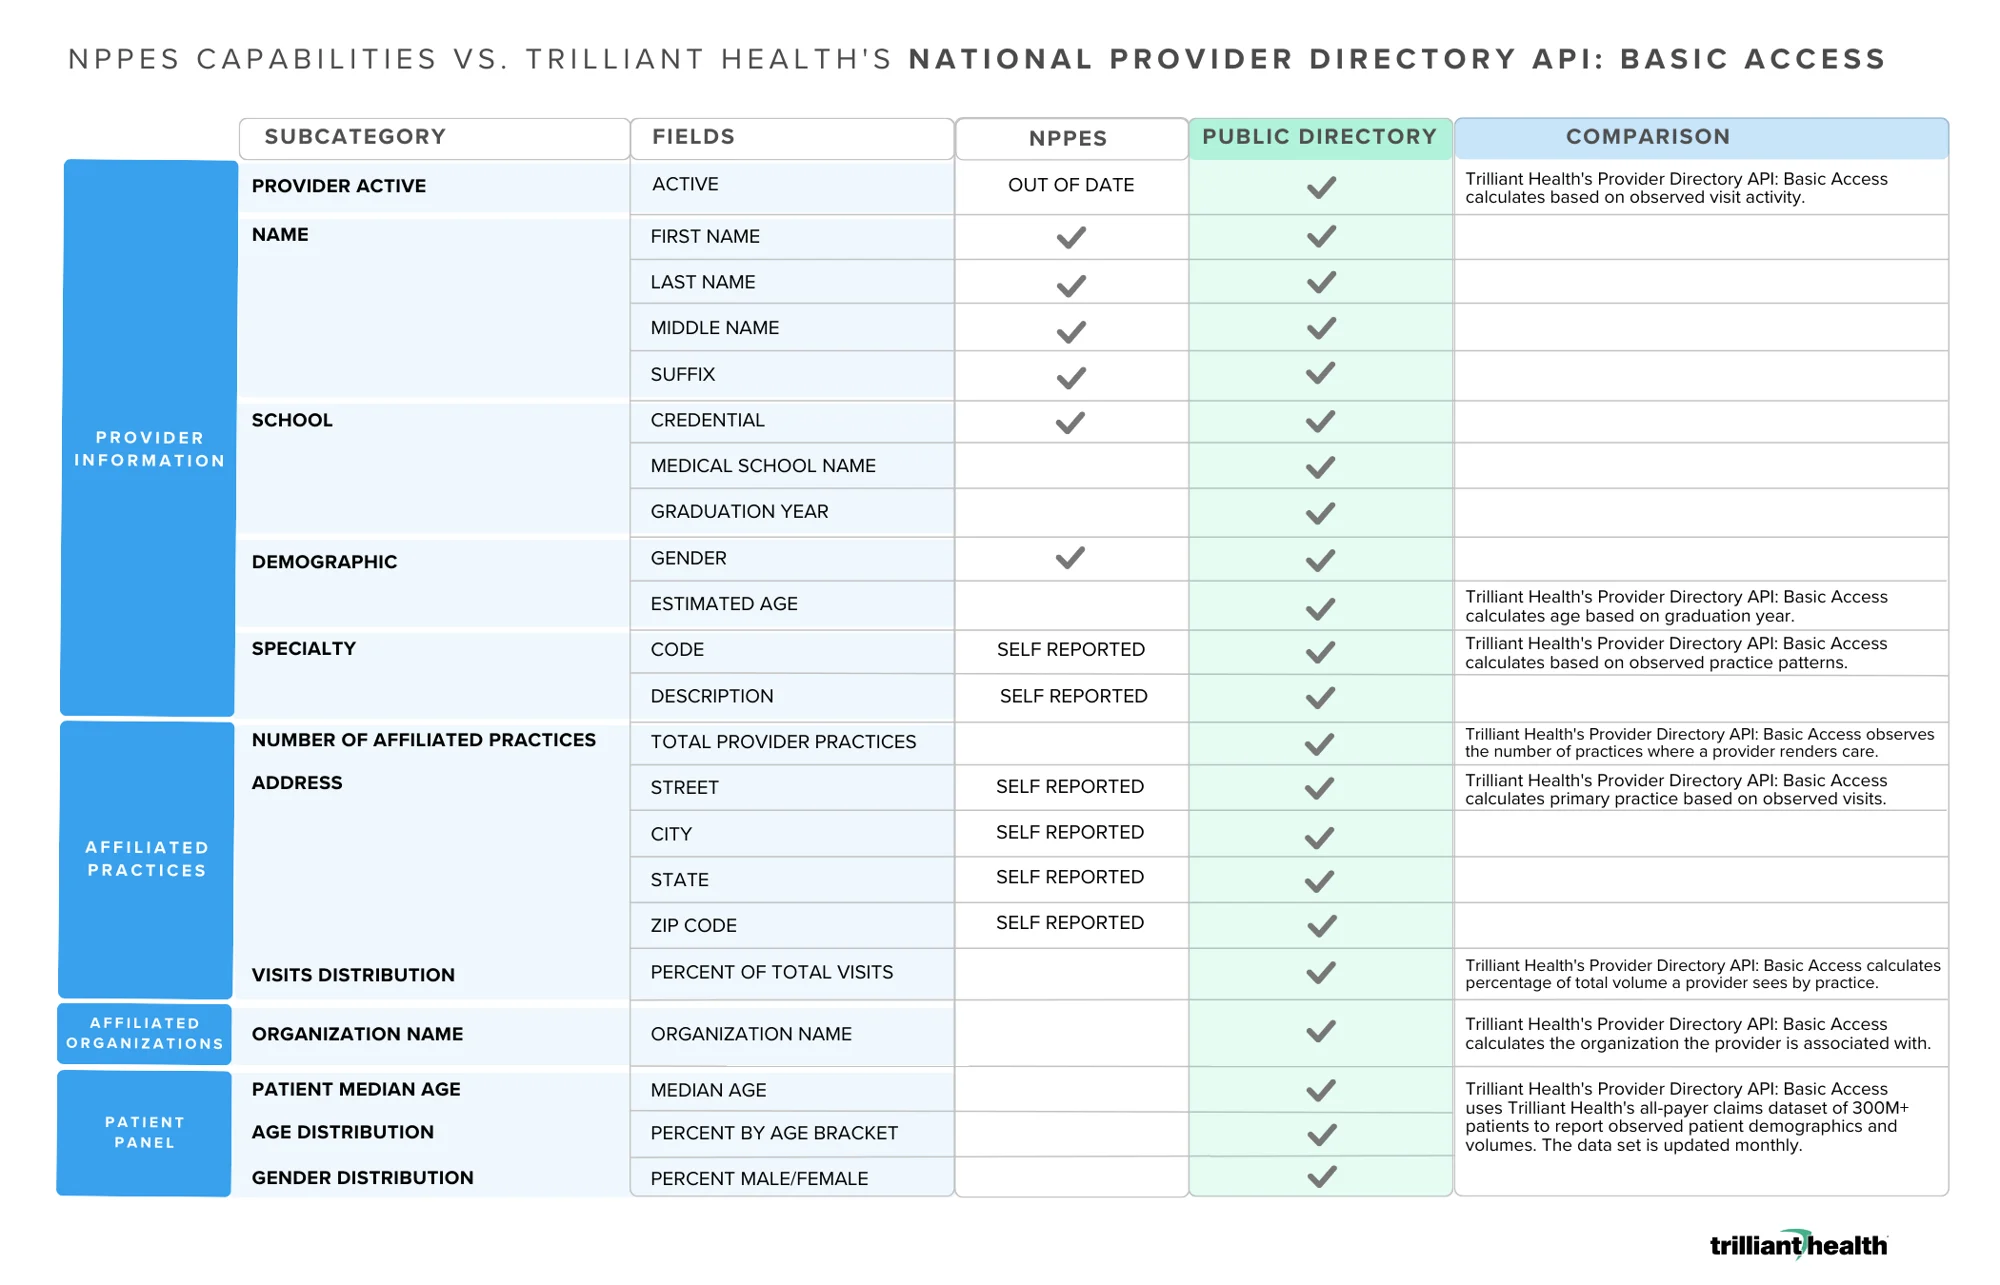 Trilliant Health Joins Databricks Marketplace to Provide Free Access to its National Provider Directory